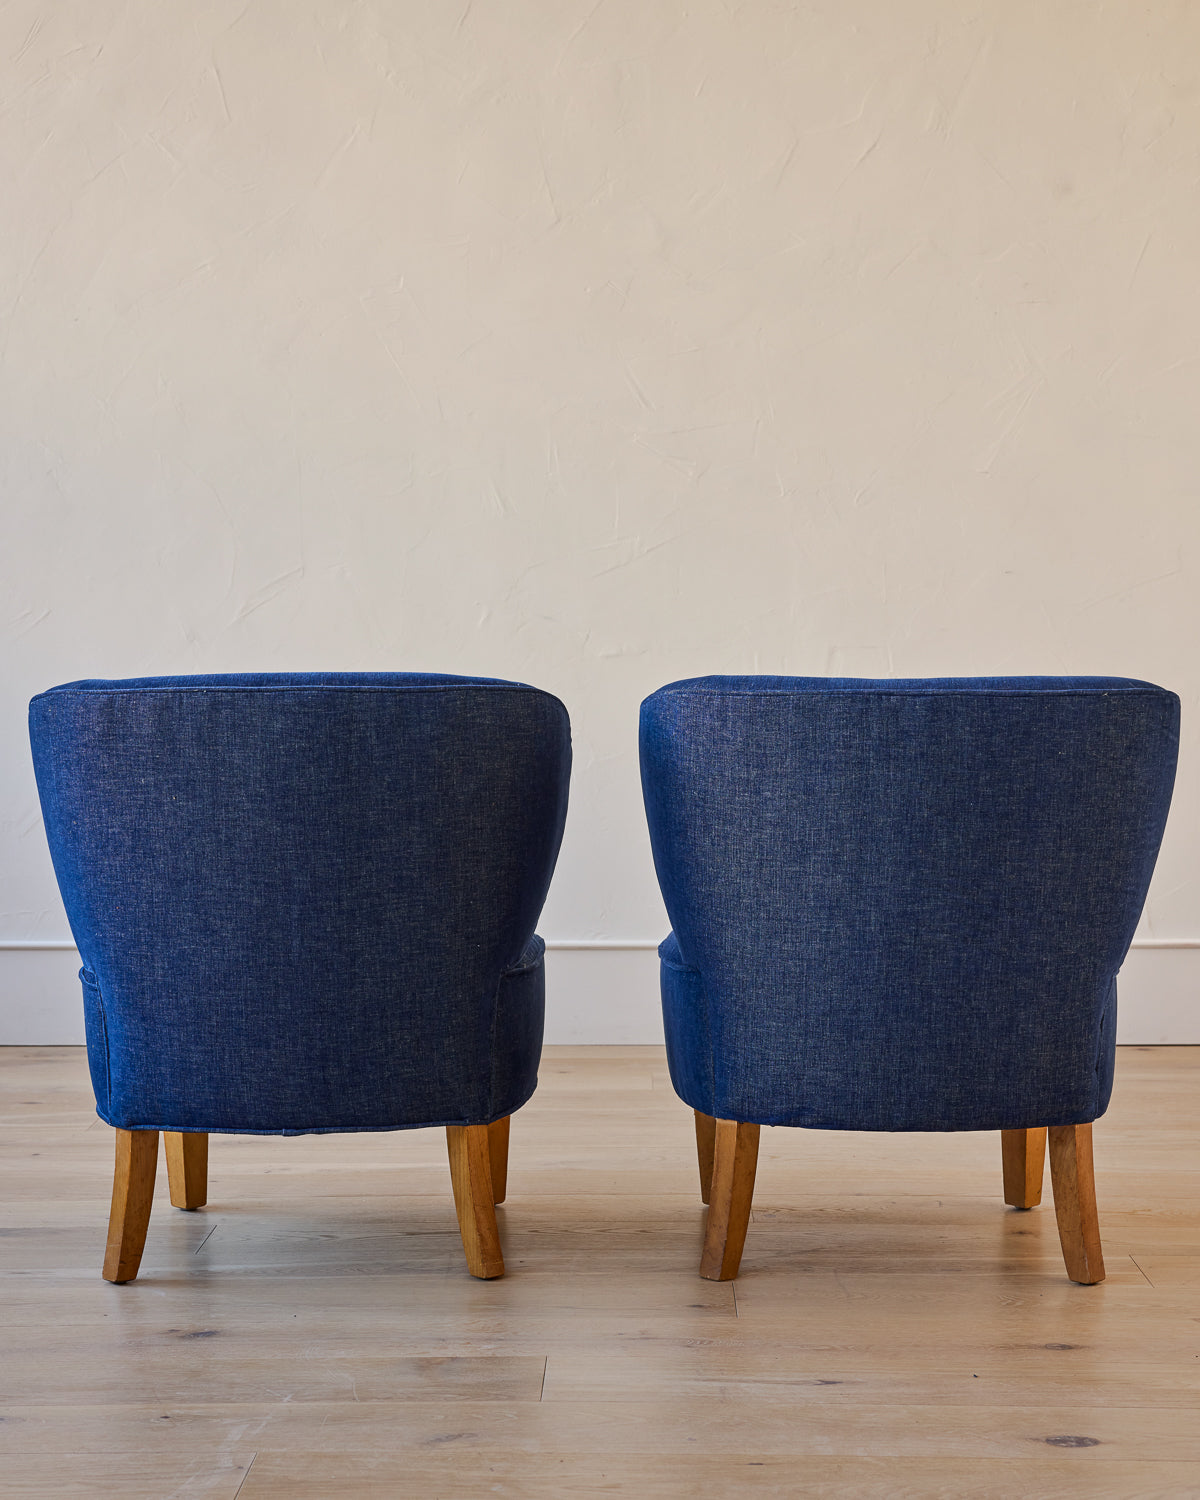 Blue Wingback Chairs